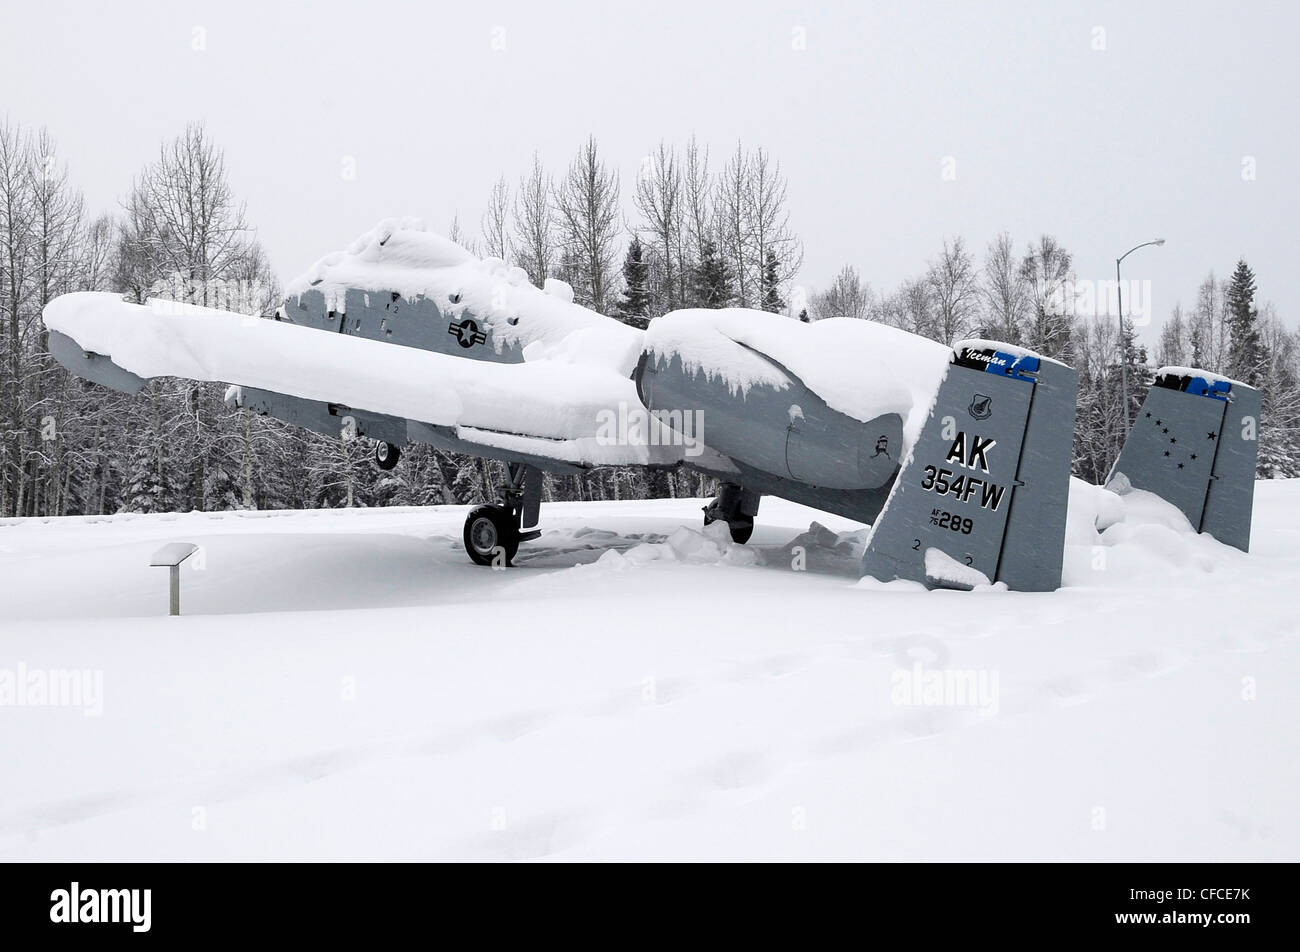 An A-10 Thunderbolt static display at Heritage Park tips backward from the weight of snow on its tail March 6, 2012, Eielson Air Force Base, Alaska. Average snowfall for March usually exceeds 7 inches each year. Stock Photo